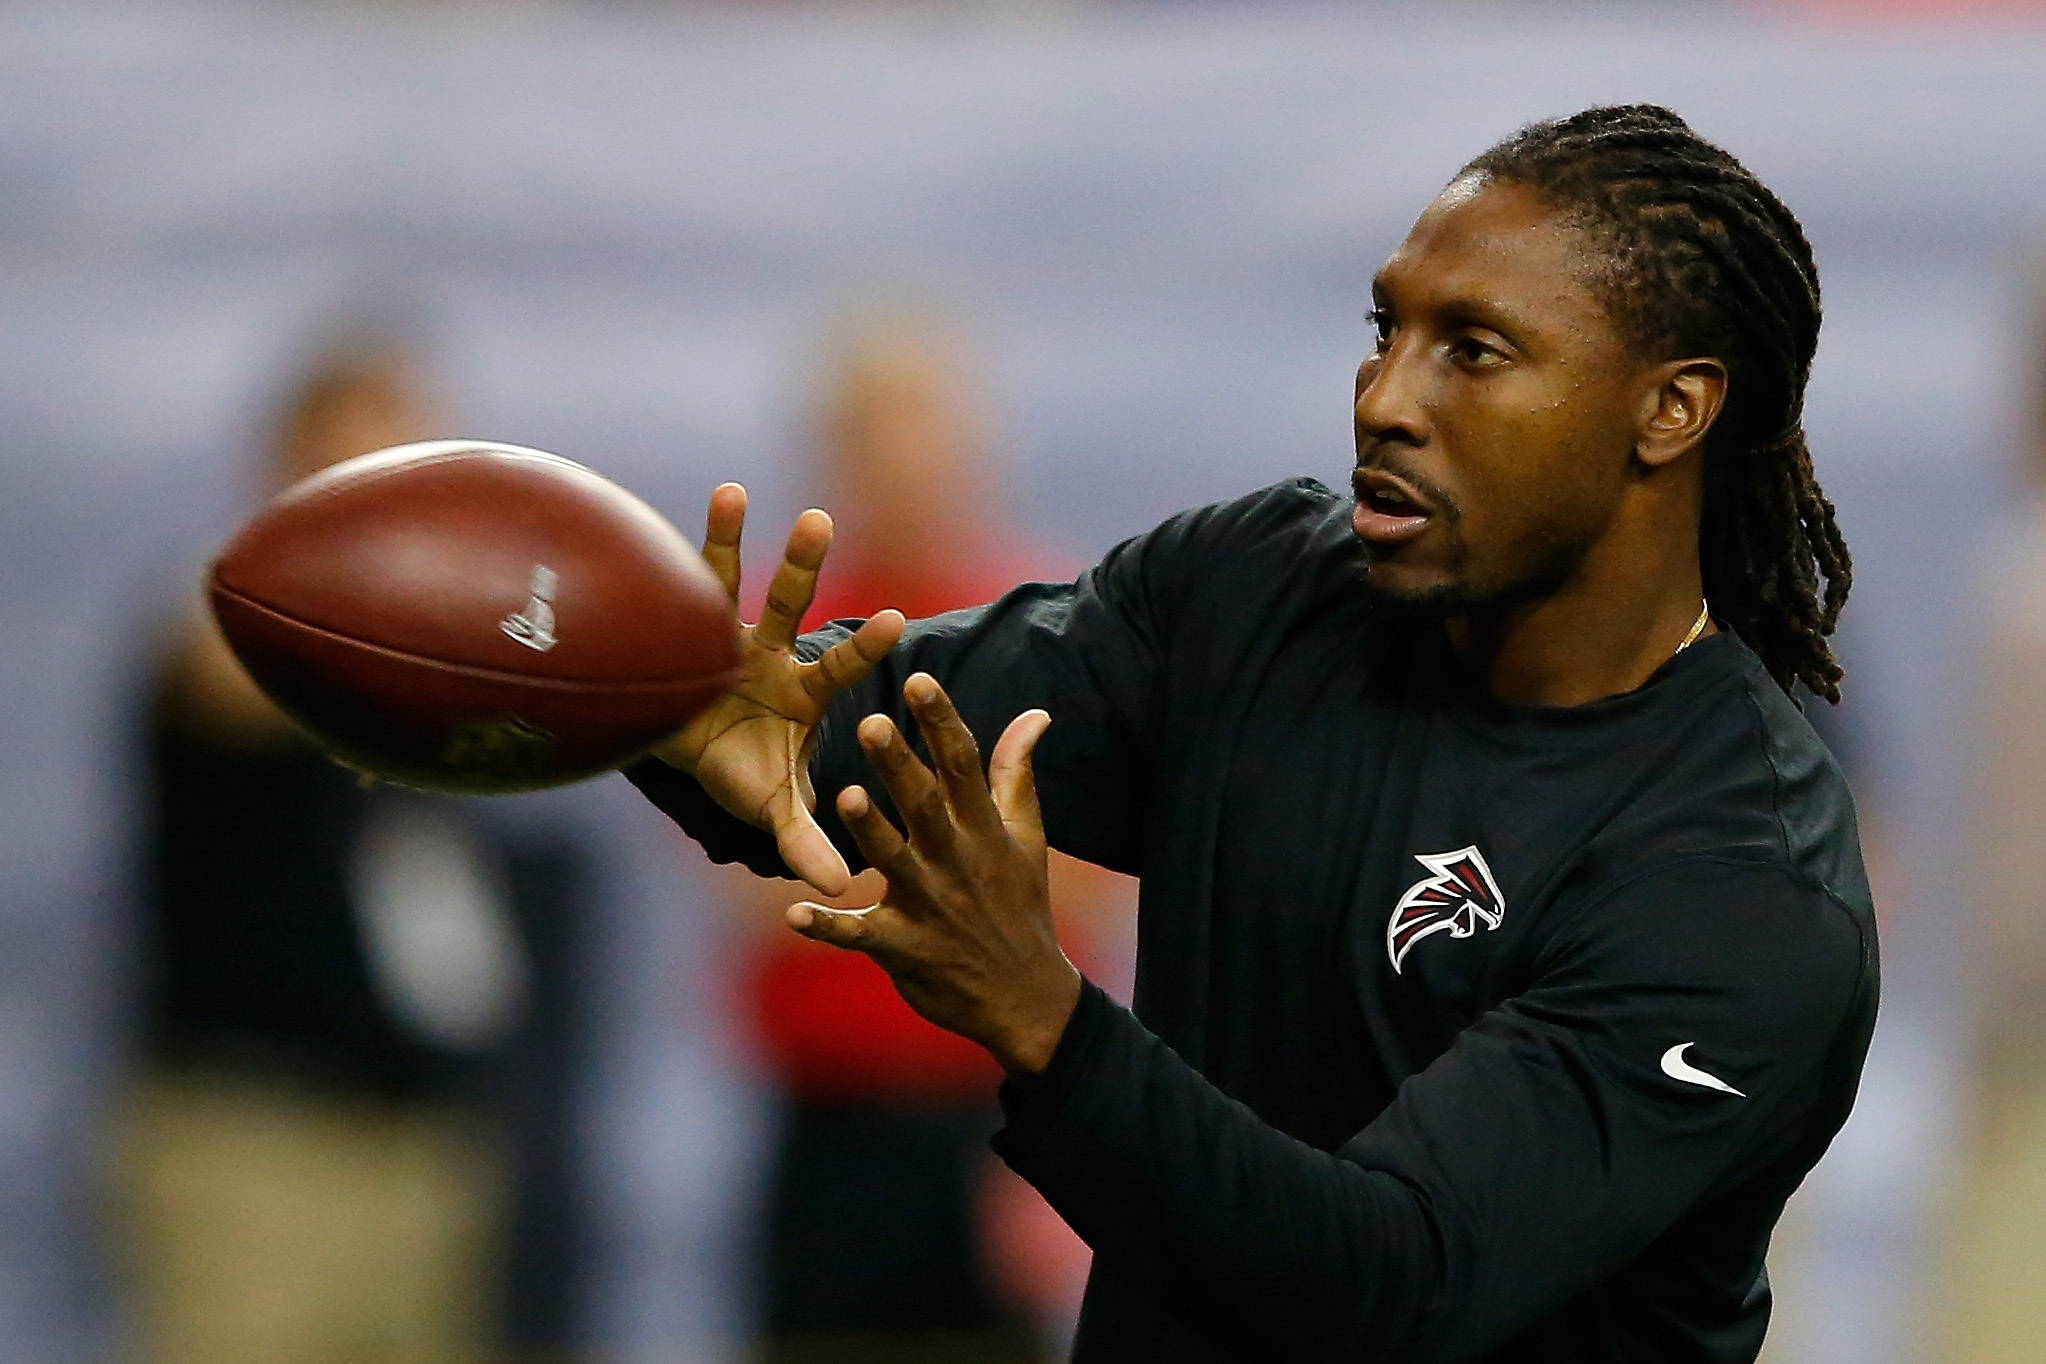 Roddy White says Atlanta Falcons offensive coordinator Kyle Shanahan  'wanted me to be out' of the offense. : r/nfl